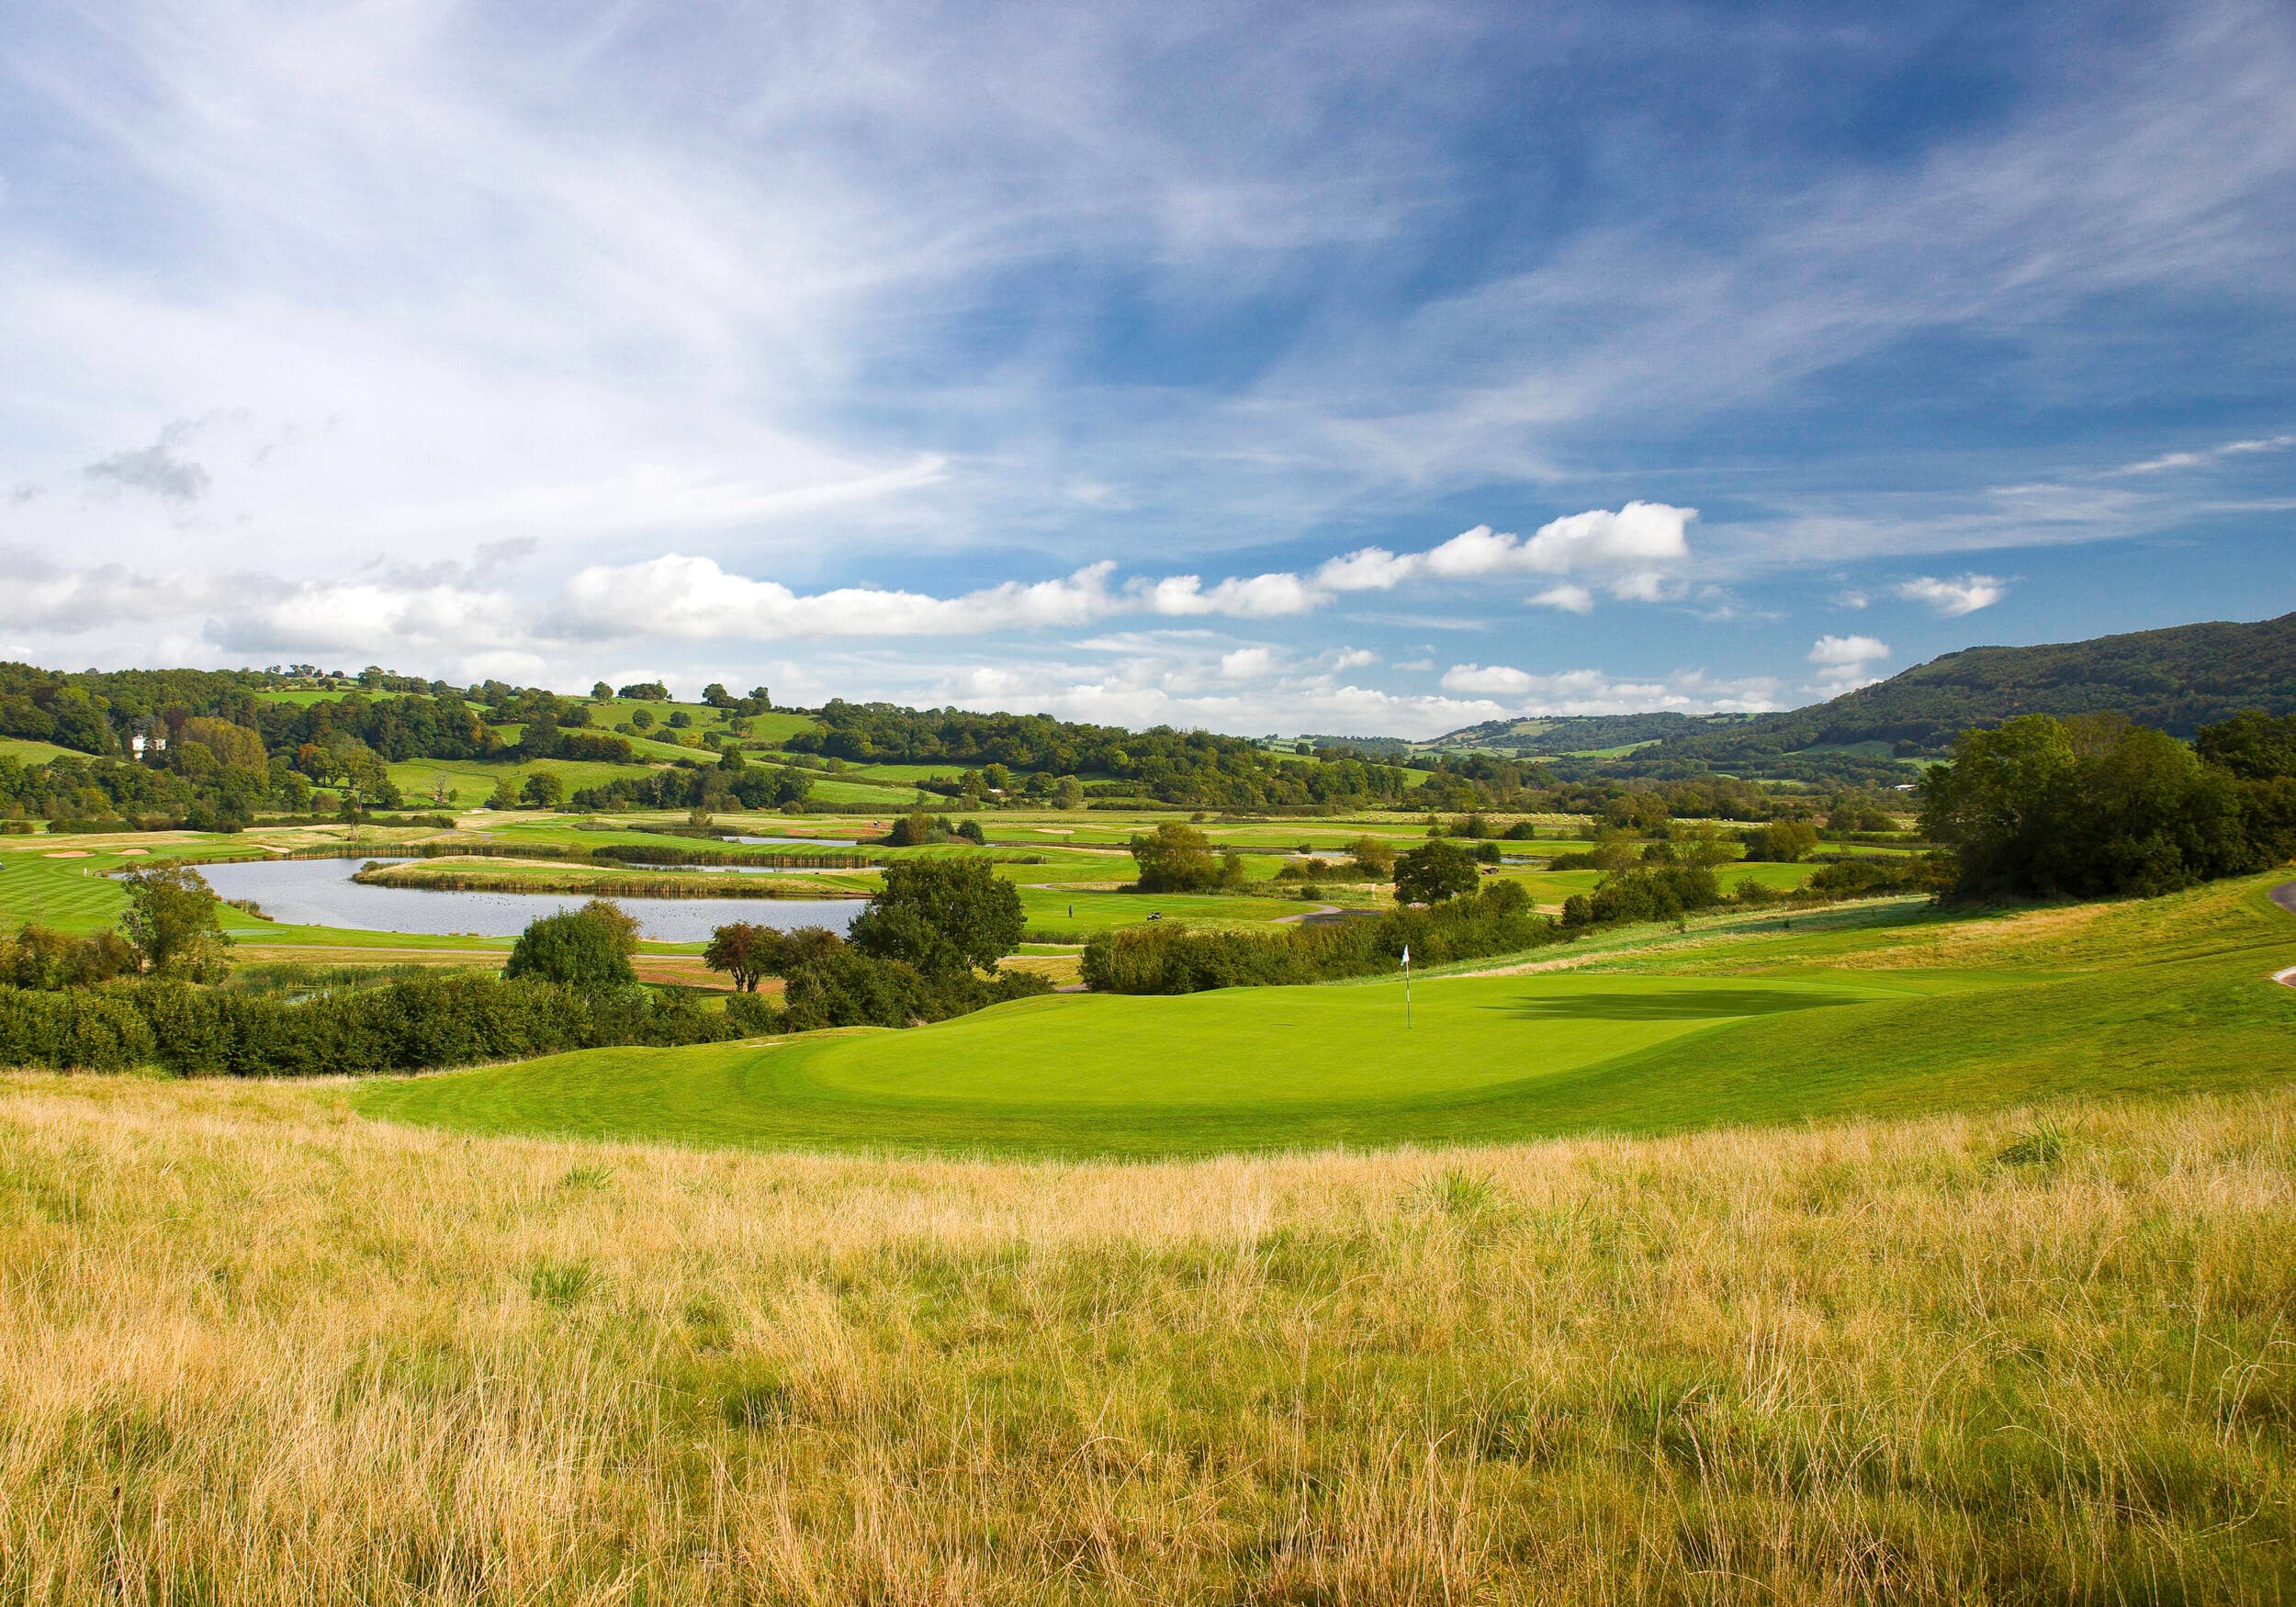 Luxury Hotel Deals & Offers  Save on Stays at Celtic Manor Resort